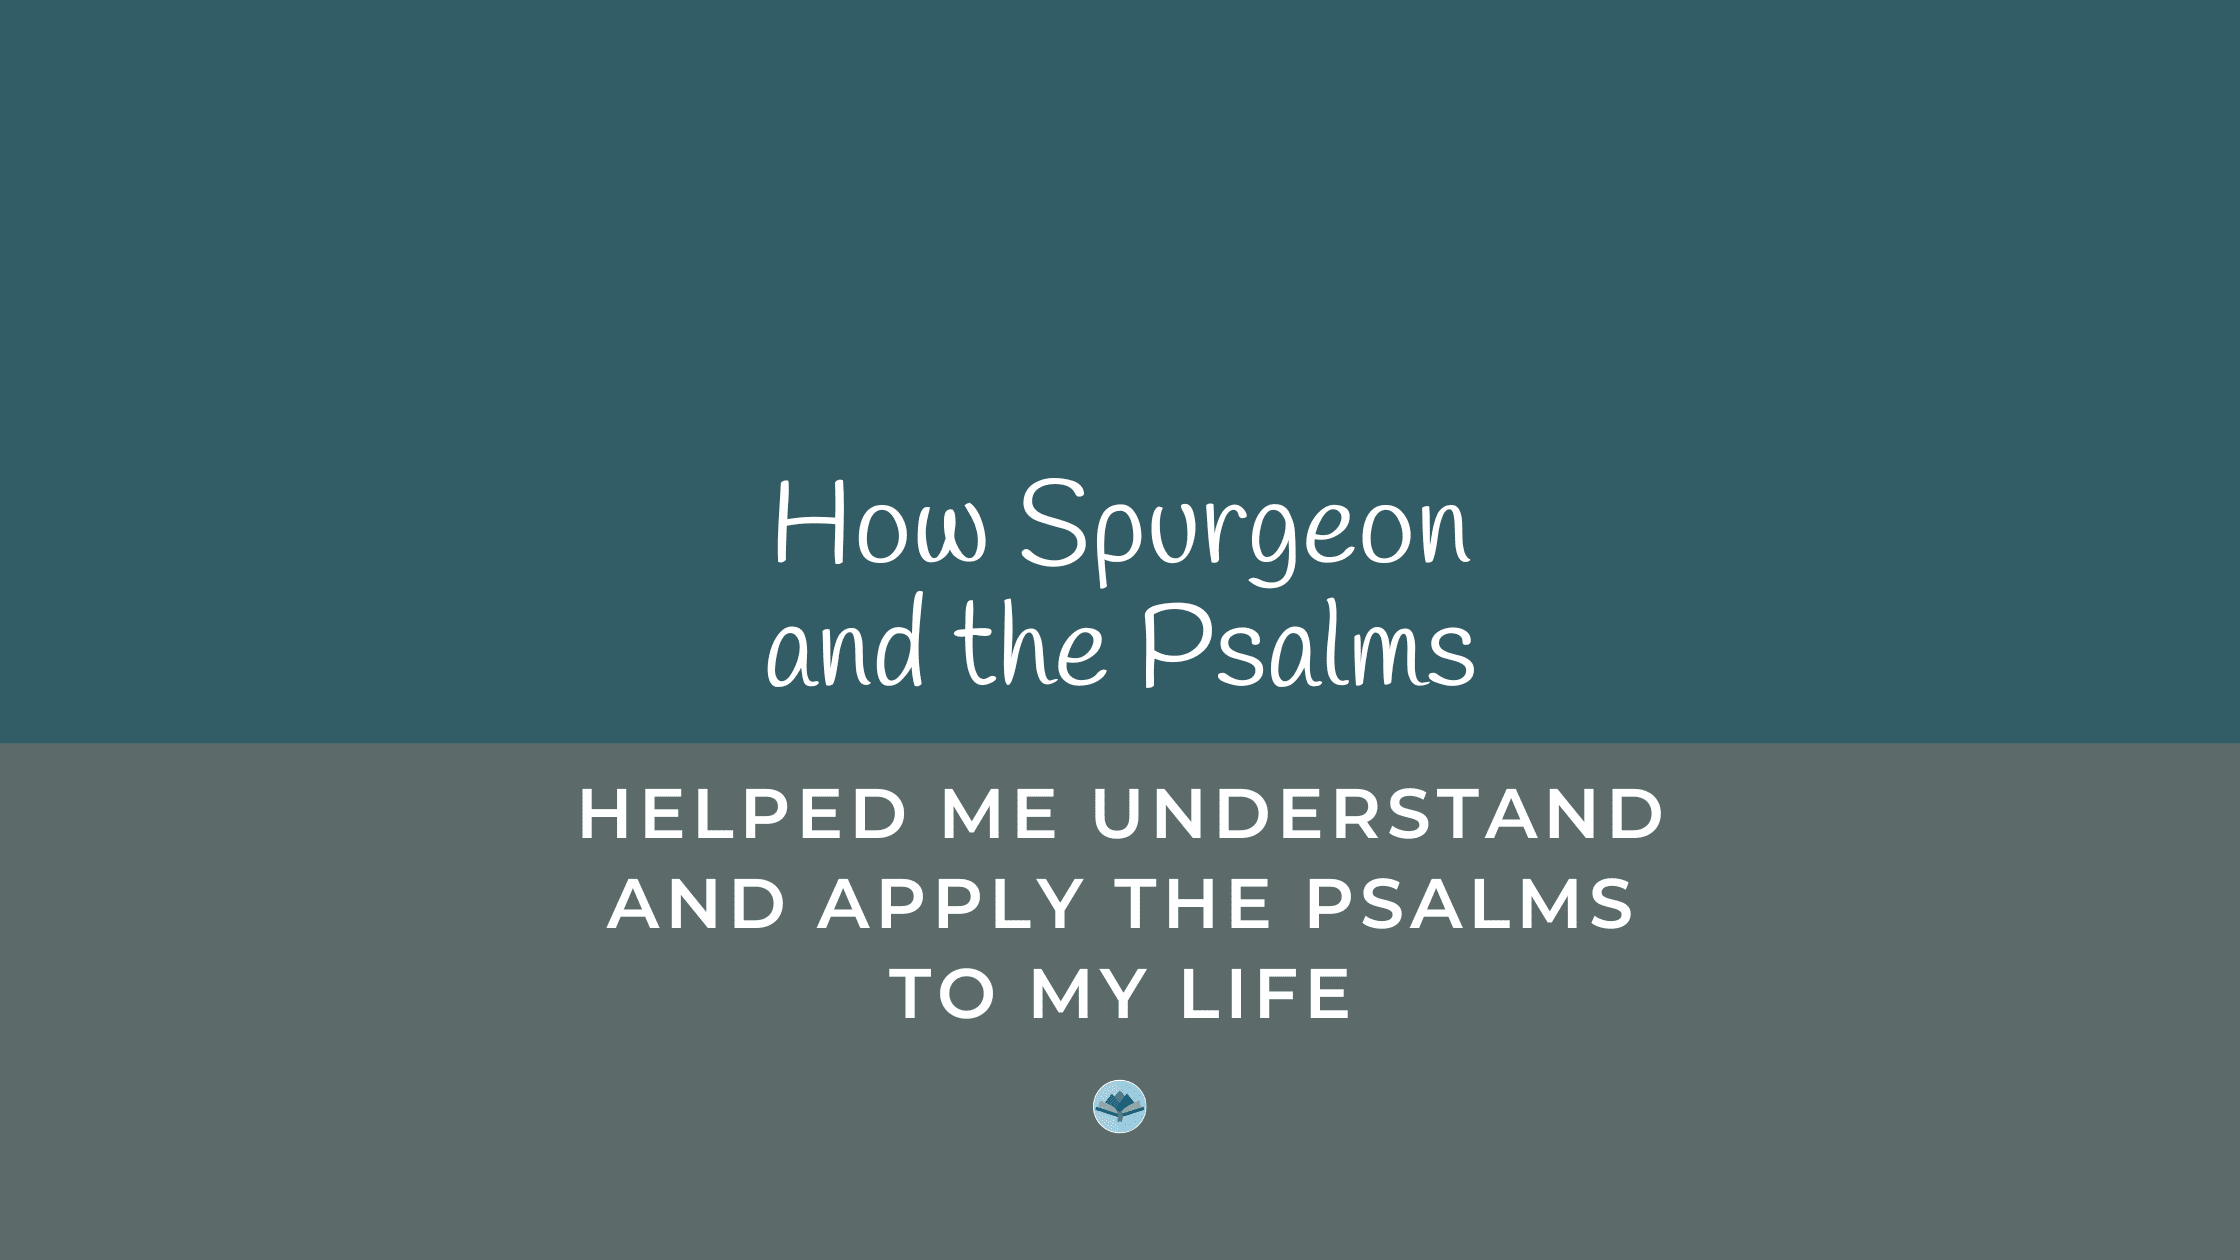 How Spurgeon and the Psalms helped me understand and apply the psalms to my life